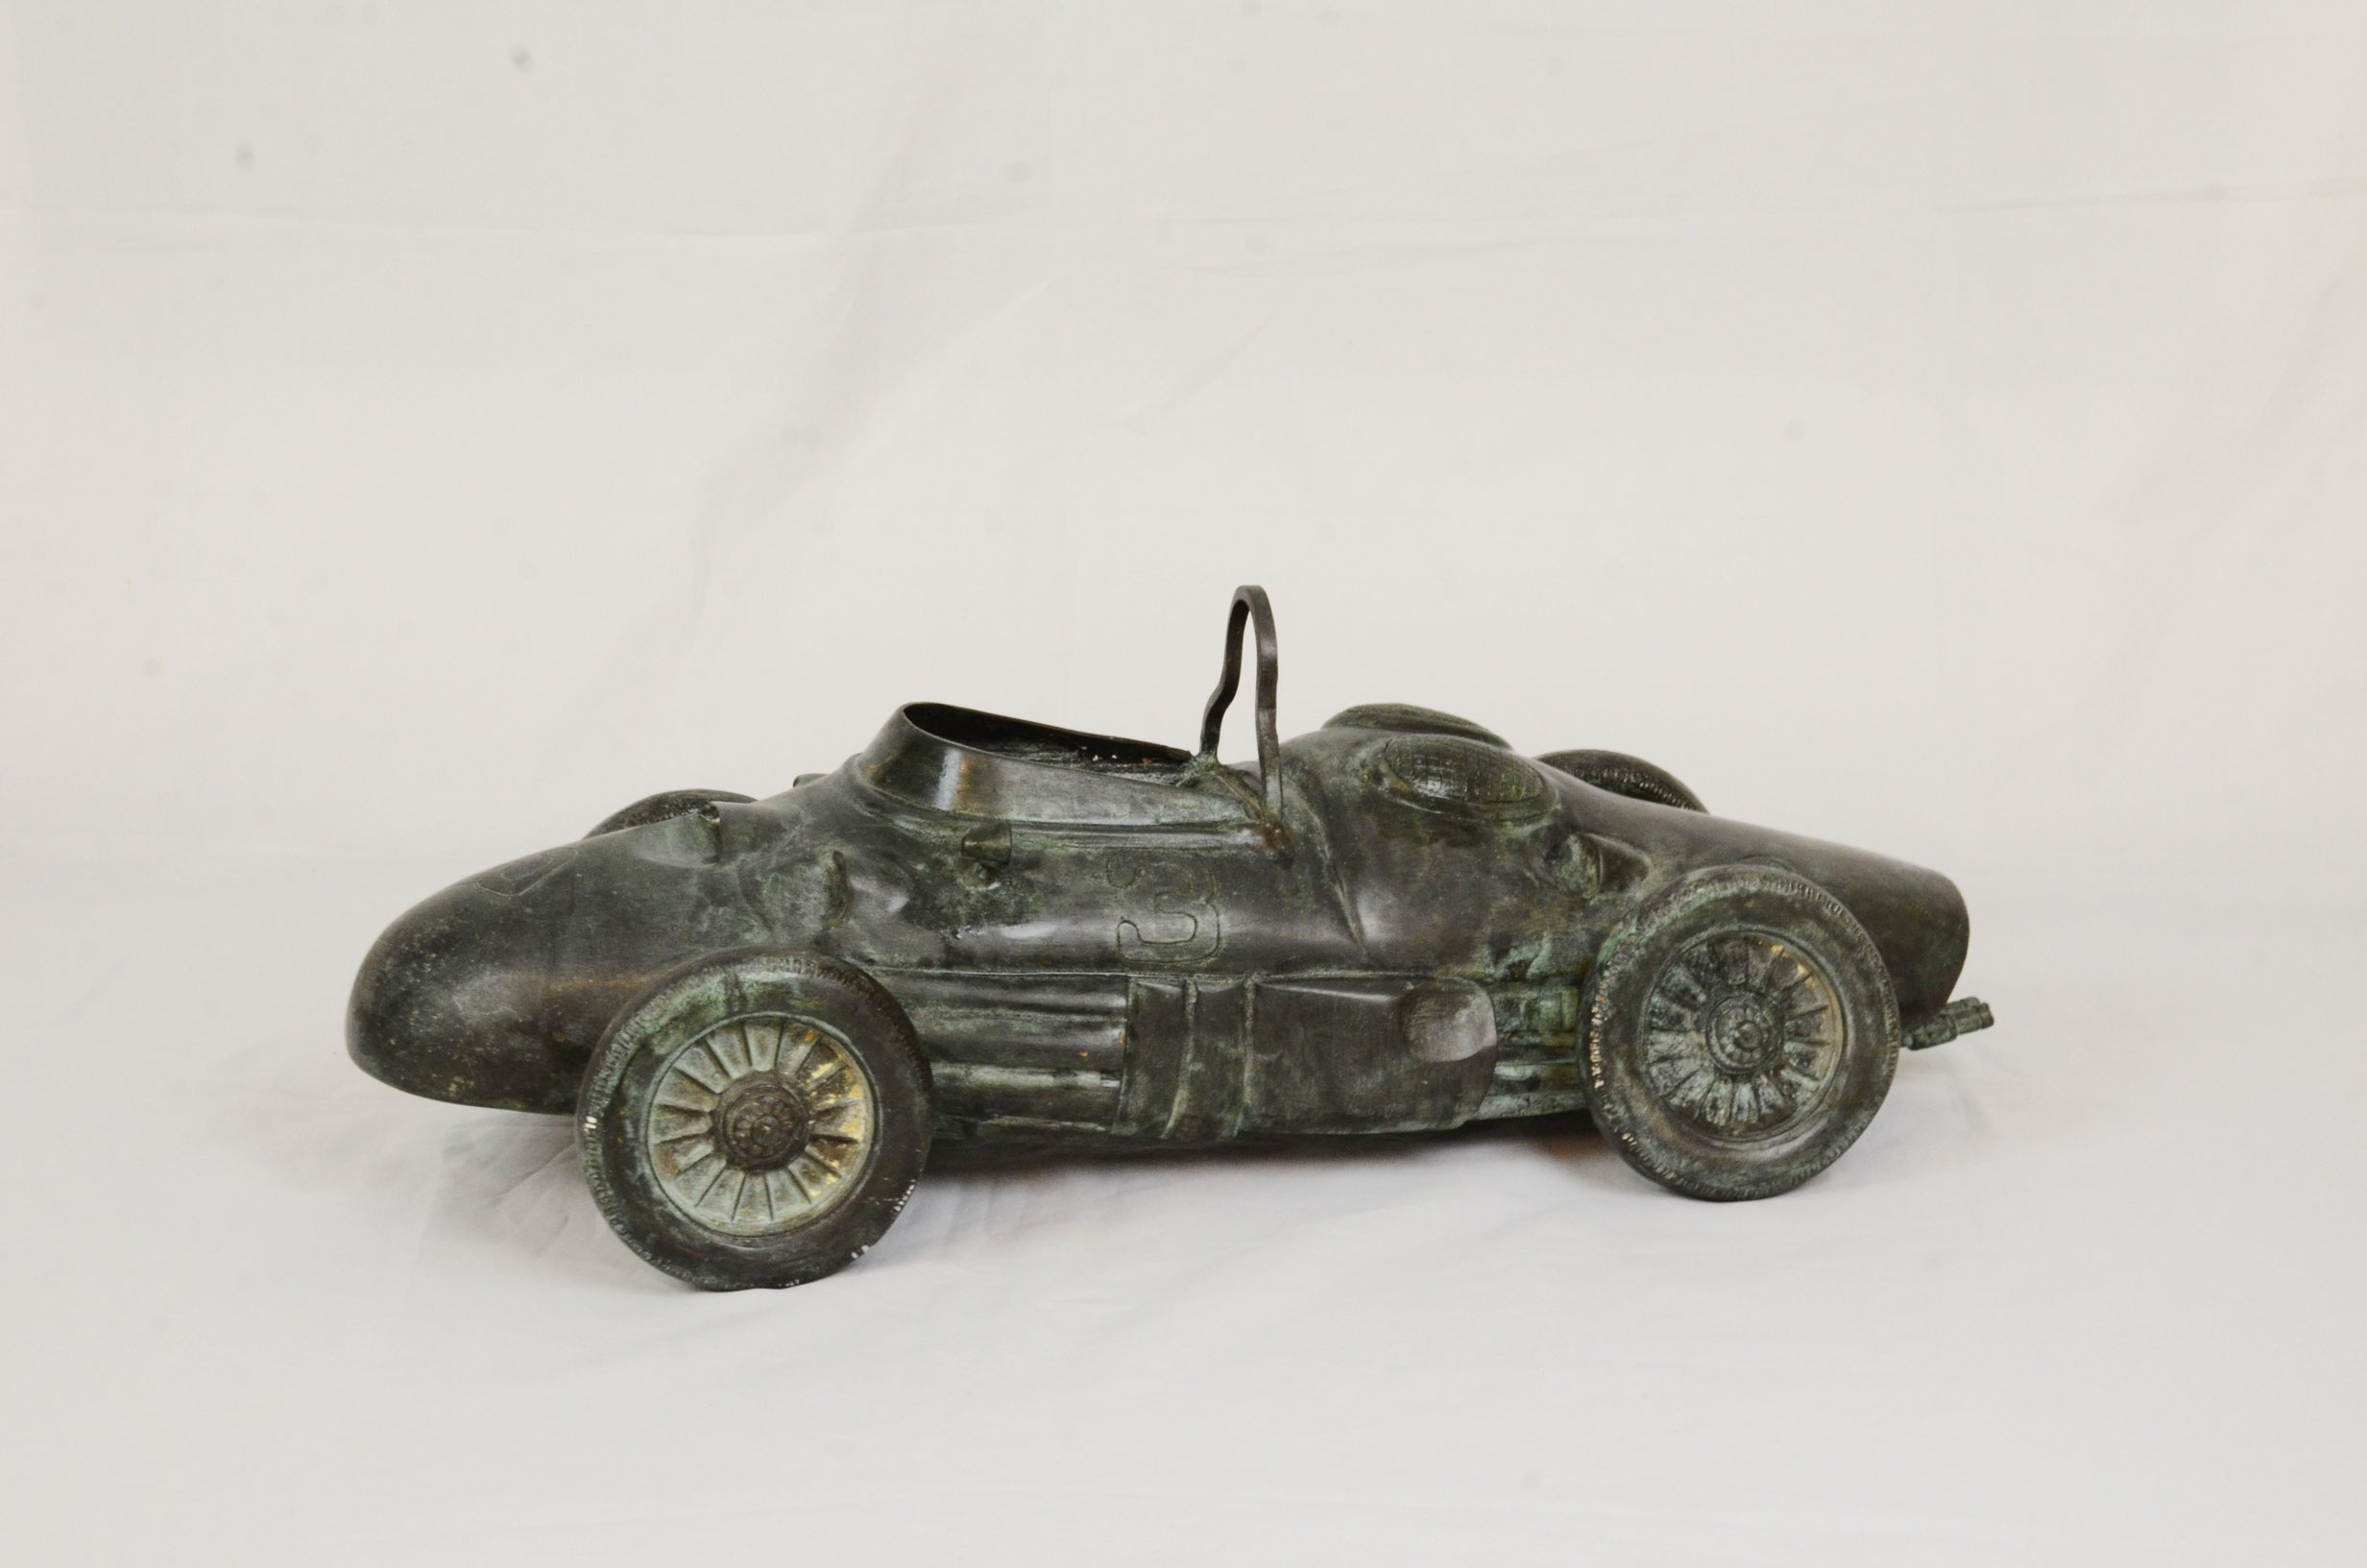 Vintage all brass racing car statue - Image 2 of 5